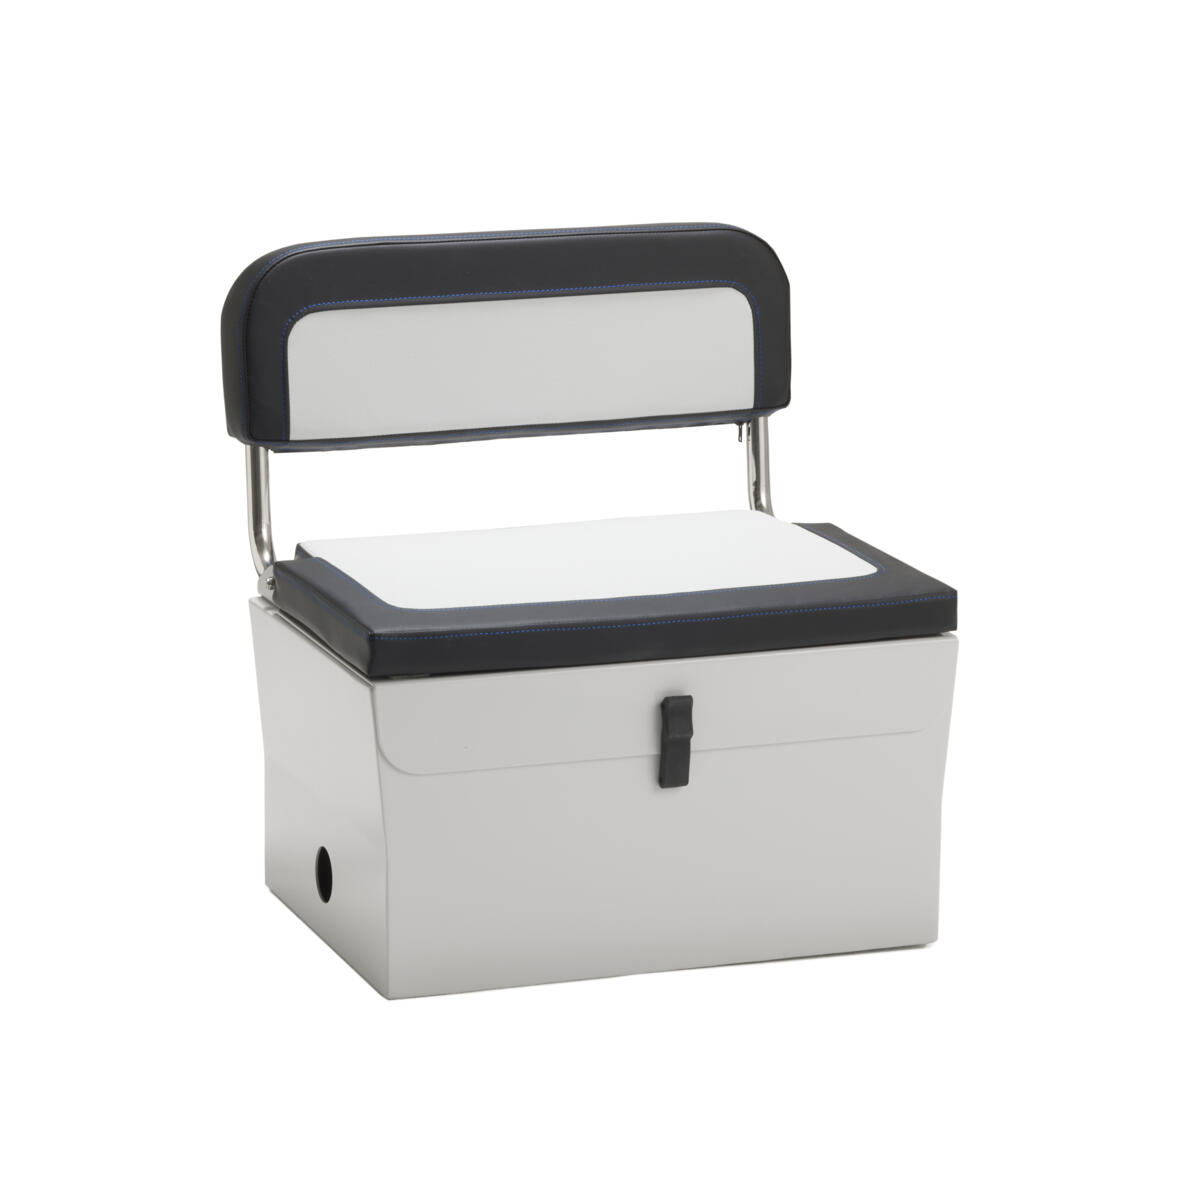 Sturdy and lightweight, it adds comfort and storage to your vessel.